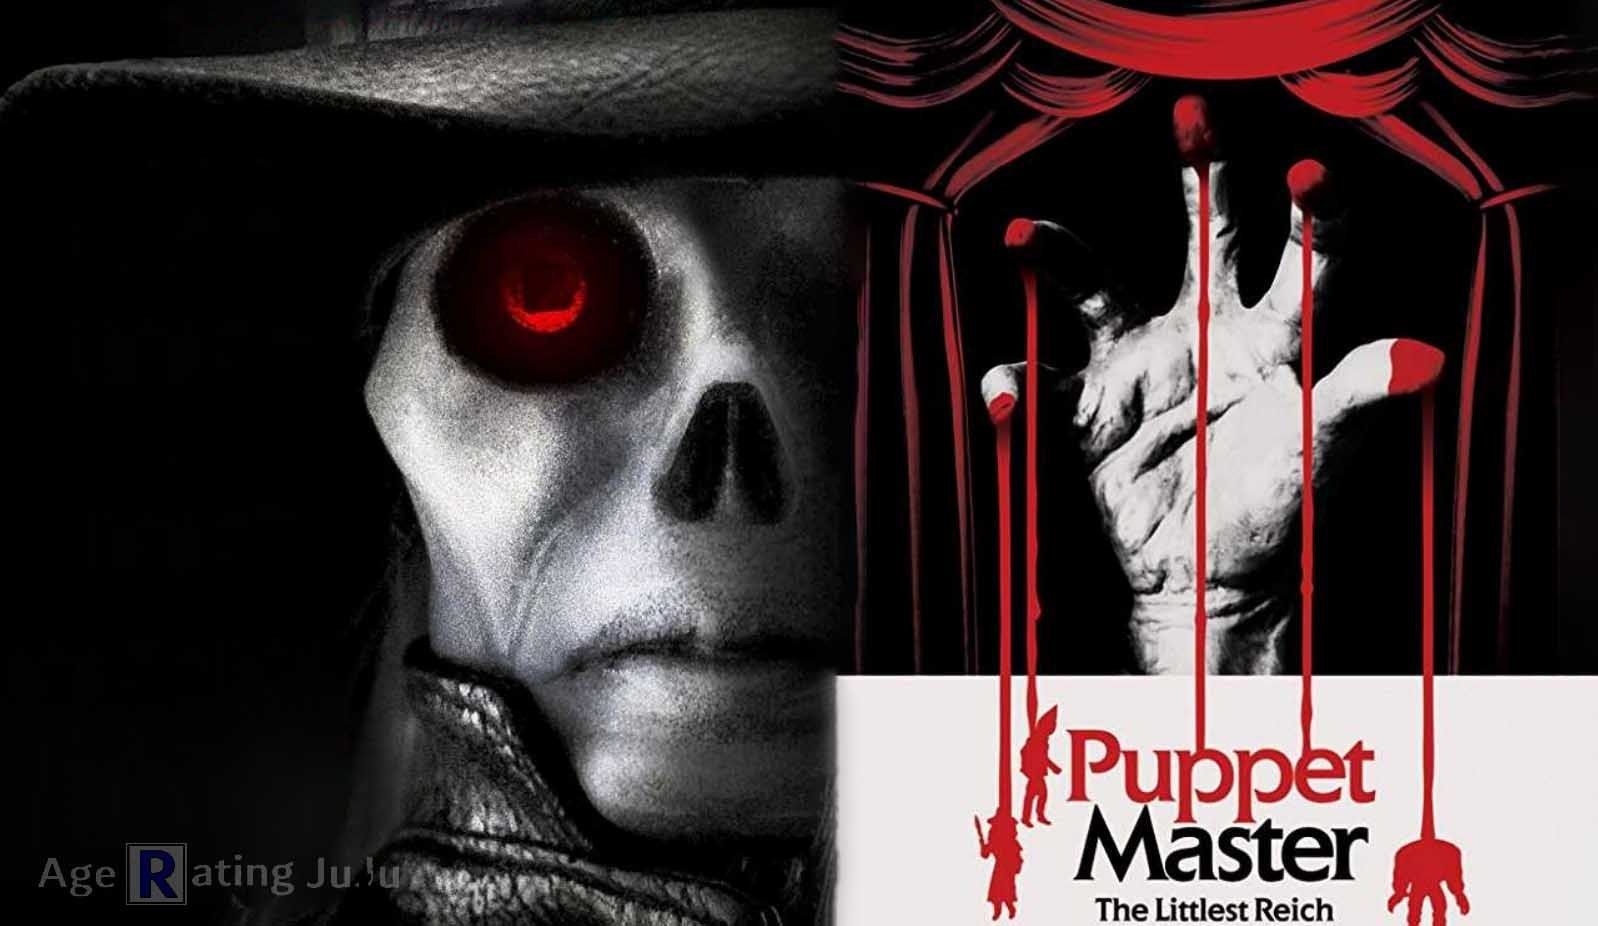 1598x926 Puppet Master The Littlest Reich Movie 2022 Poster Image And Wallpaper Movie Music International Mmi Cinema And Television Focus Formely Movie Music Italiano